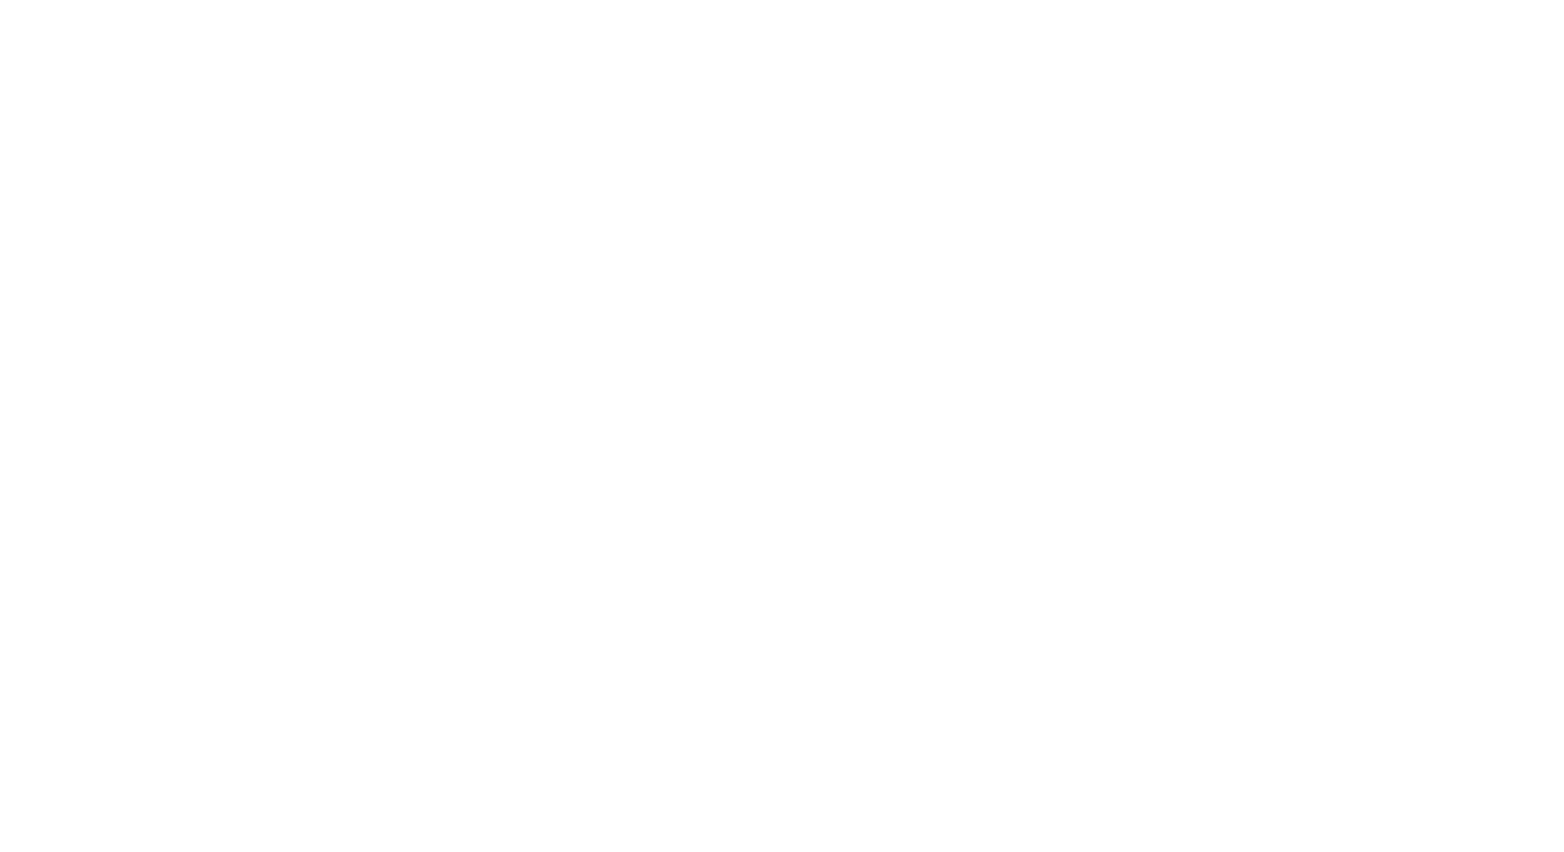 logo: home brewed photography